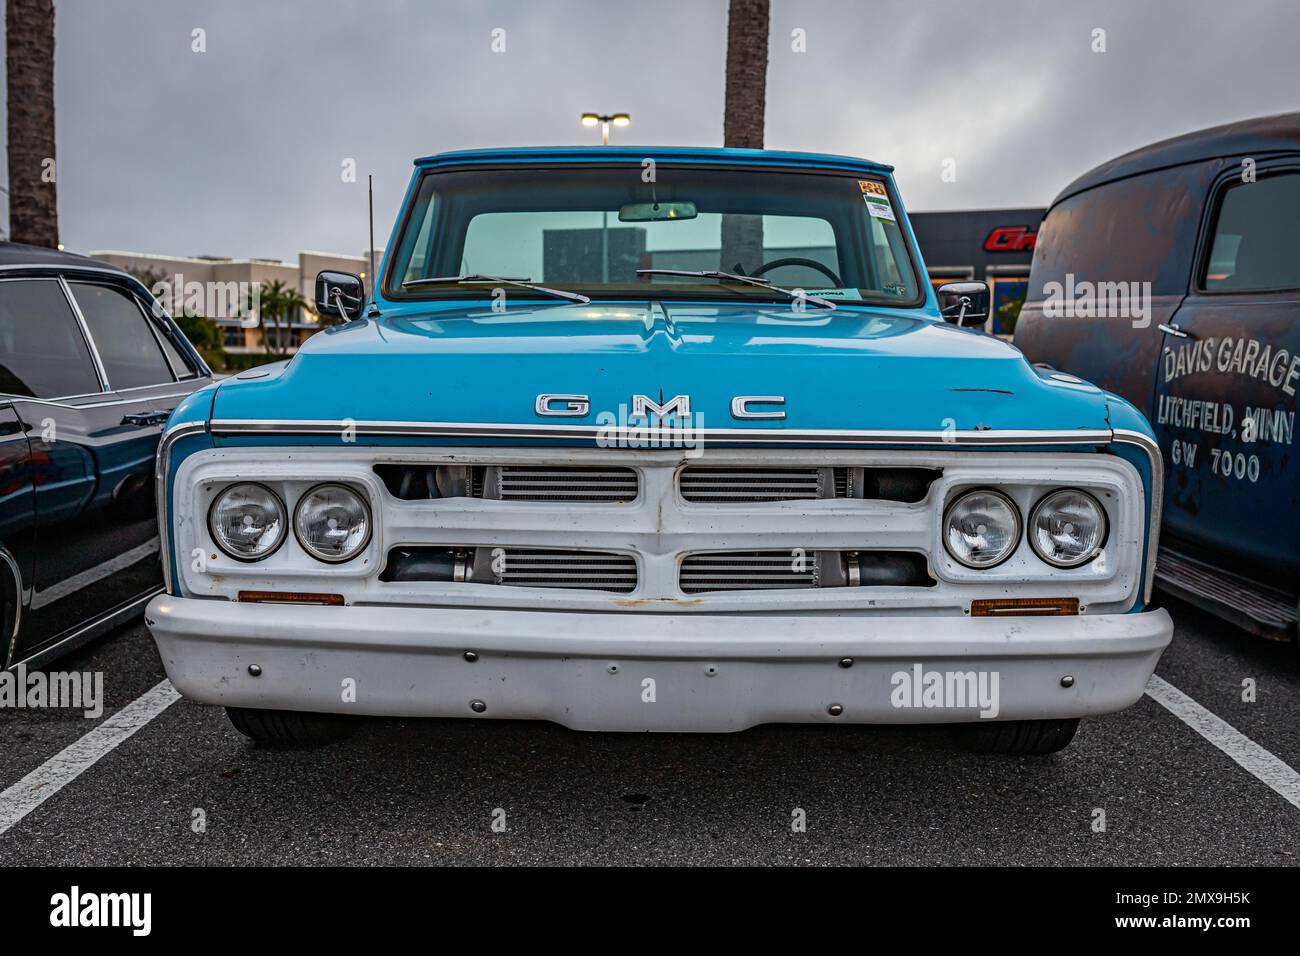 Daytona Beach, FL - November 26, 2022: Low perspective front view of a 1969 GMC C1500 Half Ton Pickup Truck at a local car show. Stock Photo